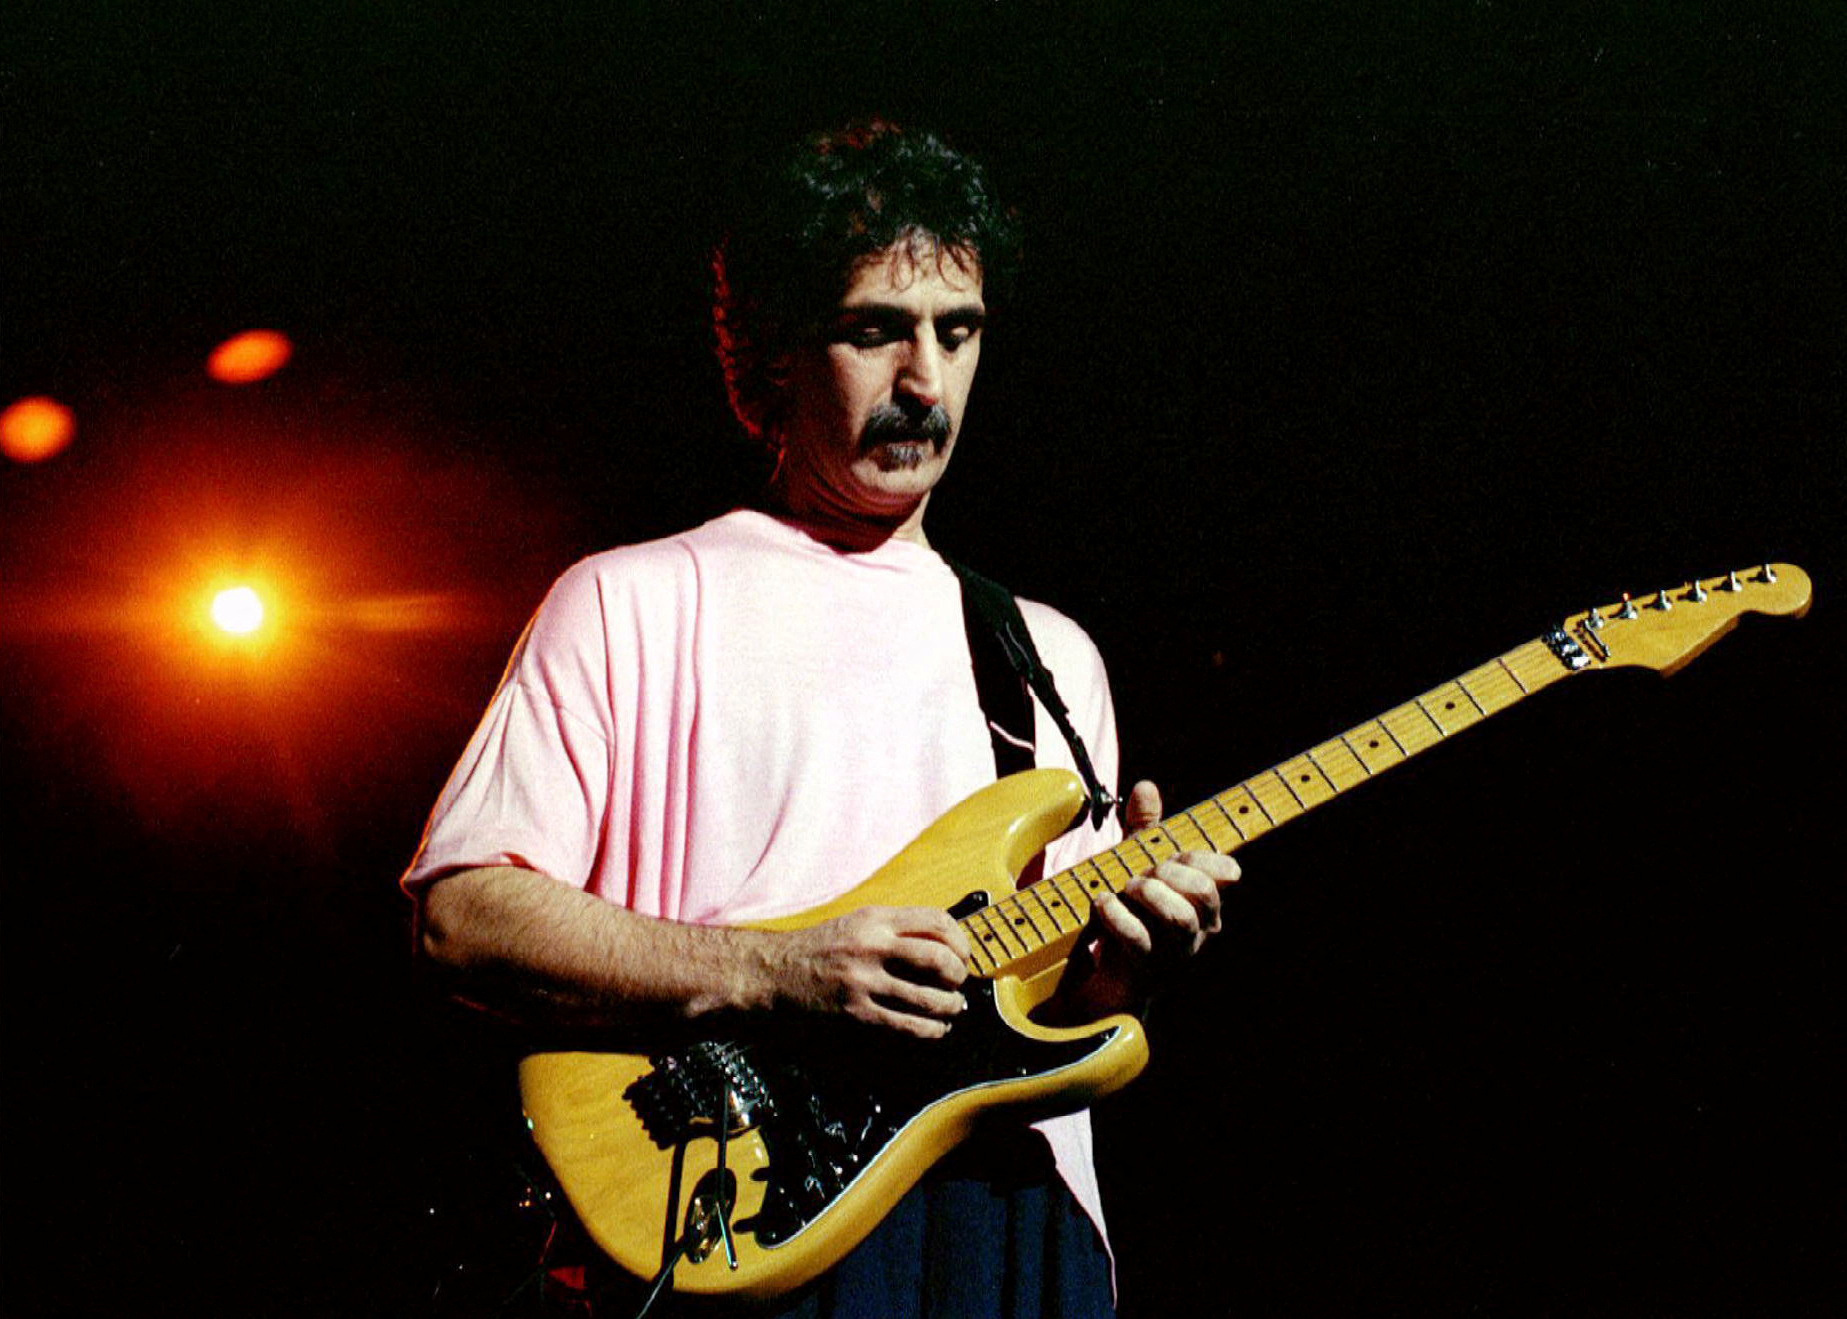 Rock musician Frank Zappa plays guitar during a concert at the Warner Theatre in Washington